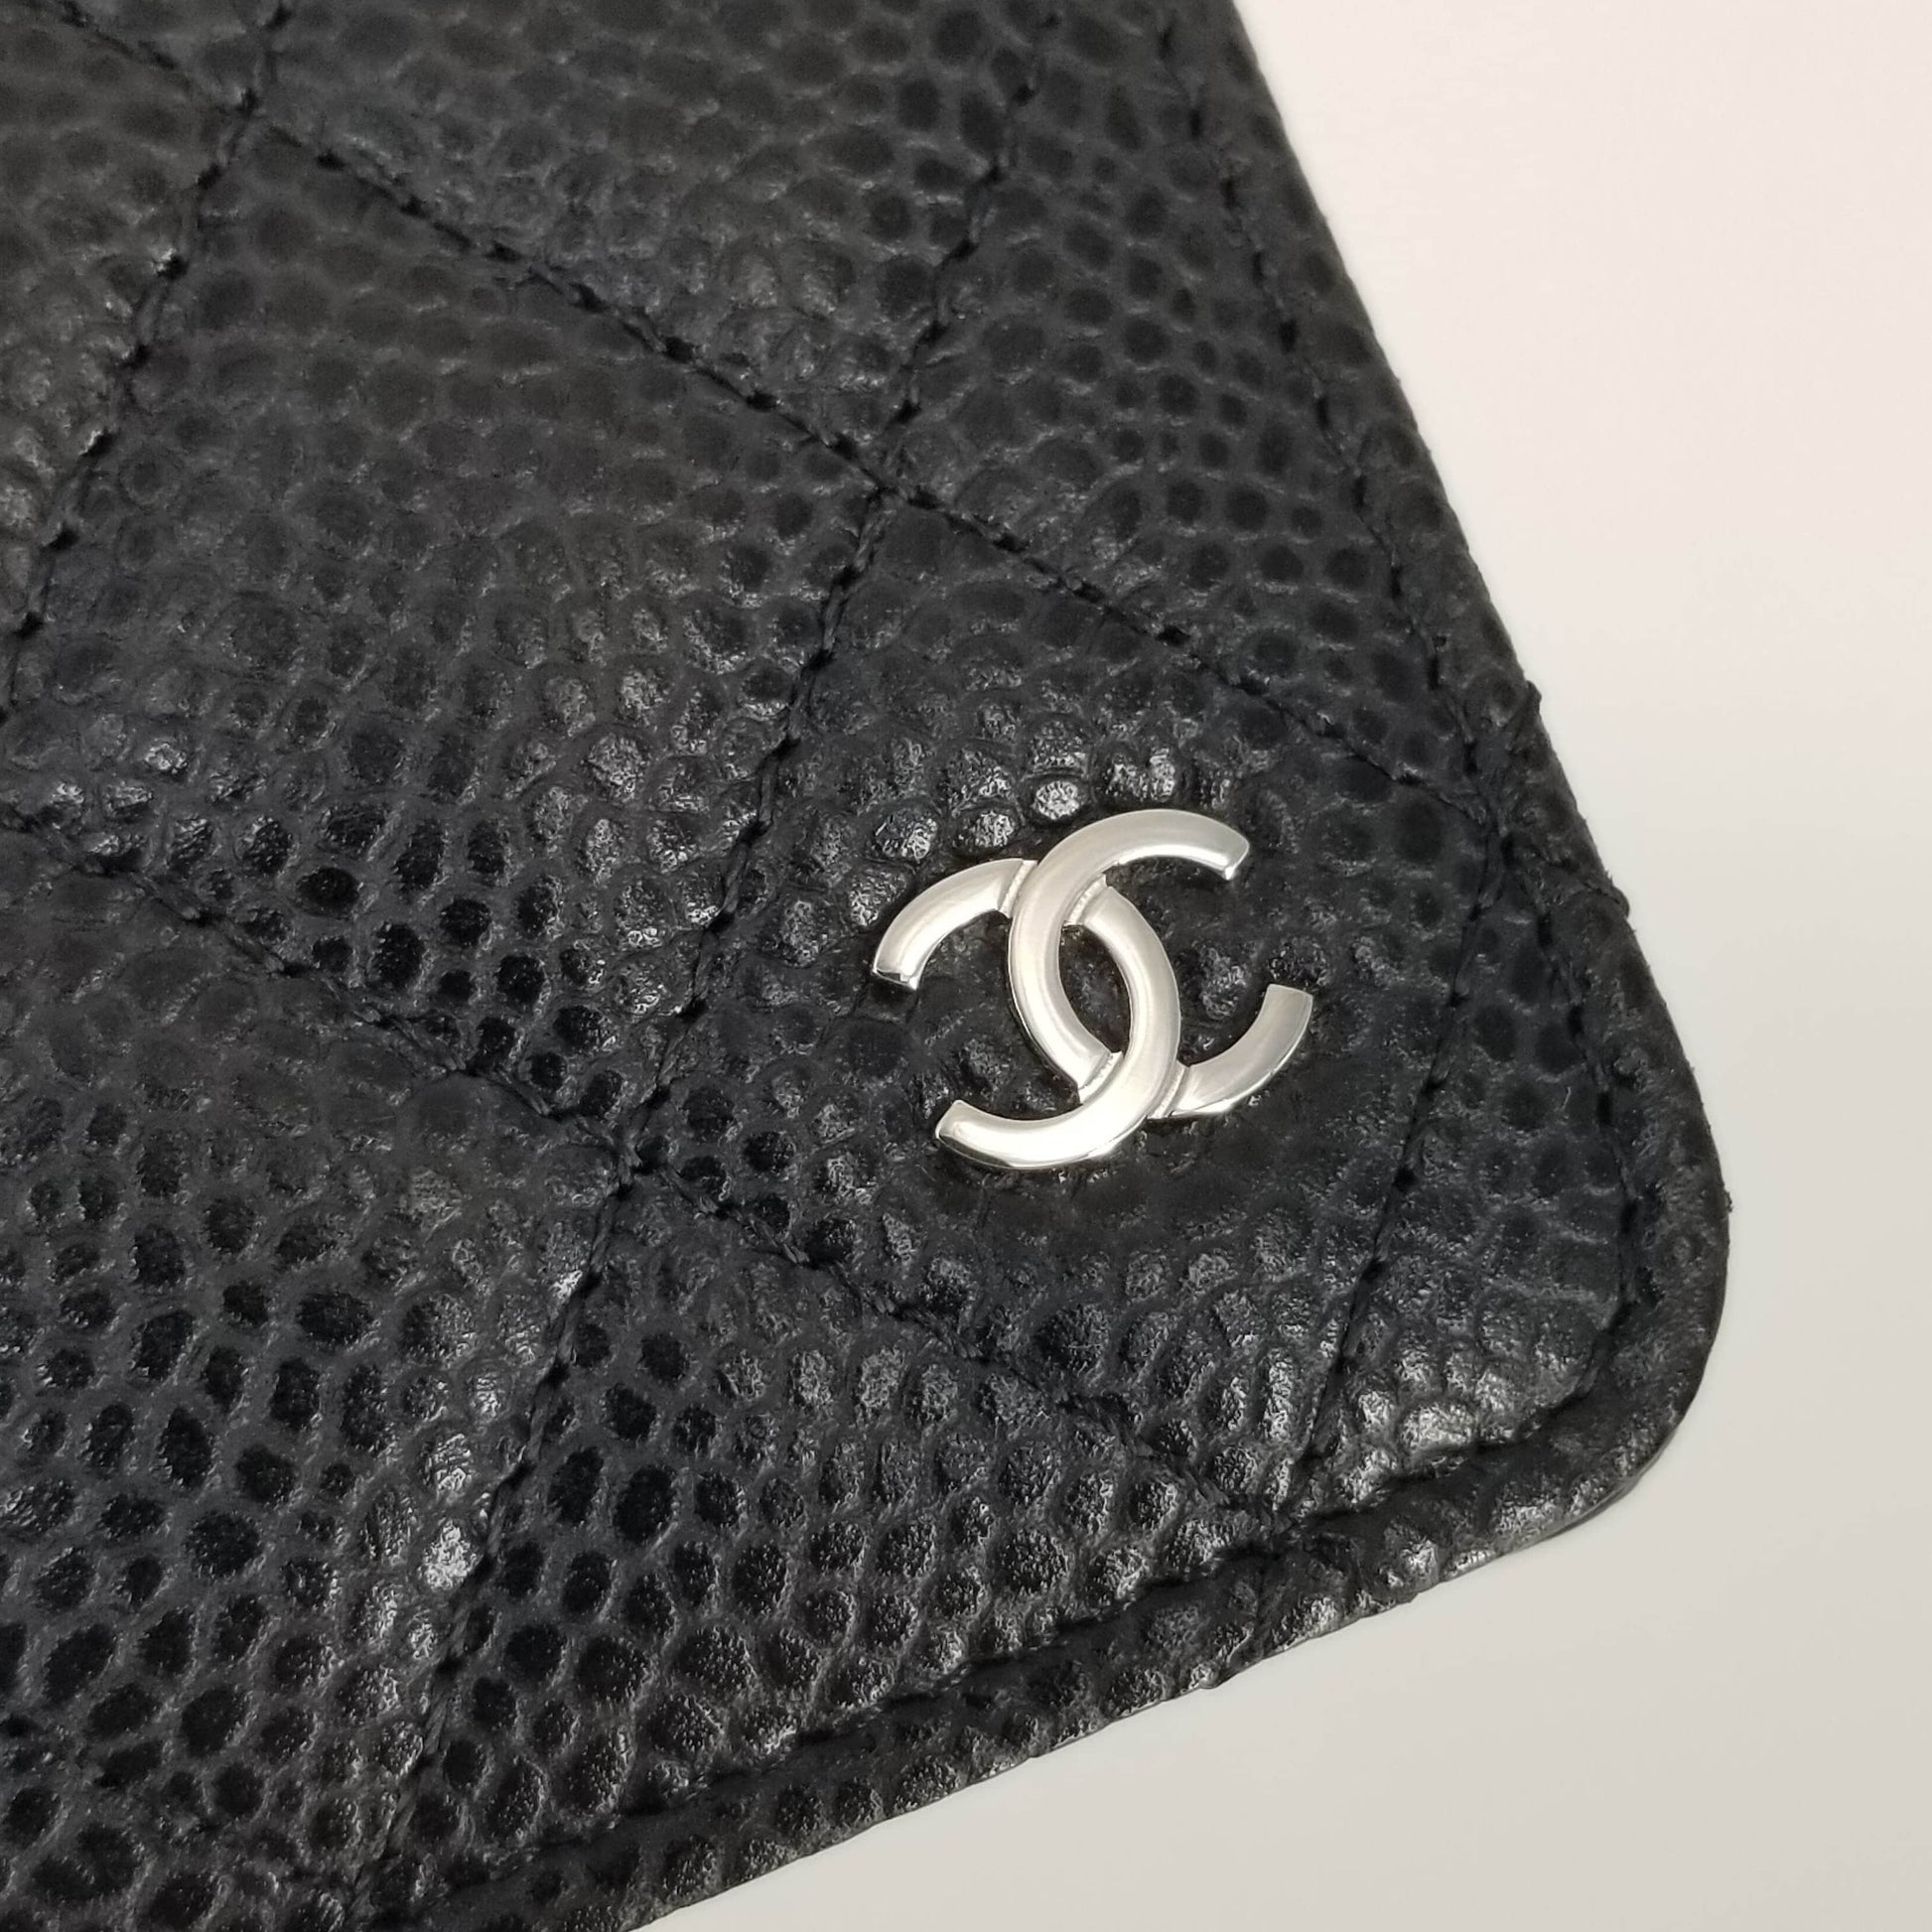 Authentic Chanel Black Caviar Quilted IPhone 6+ Wallet Phone Case